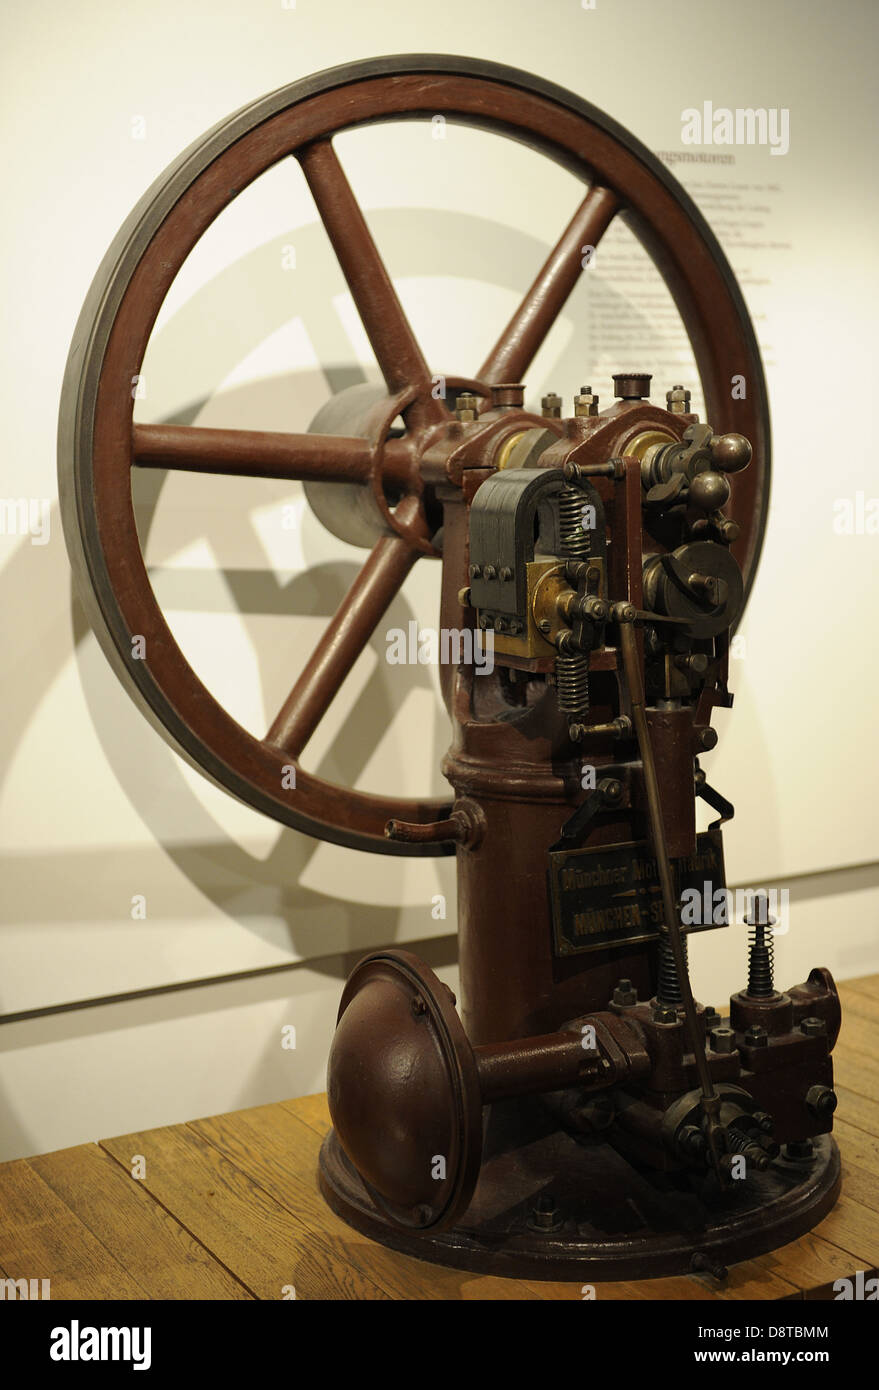 Internal Combustion Engines. Deutches Museum. Munich. Germany. Stock Photo